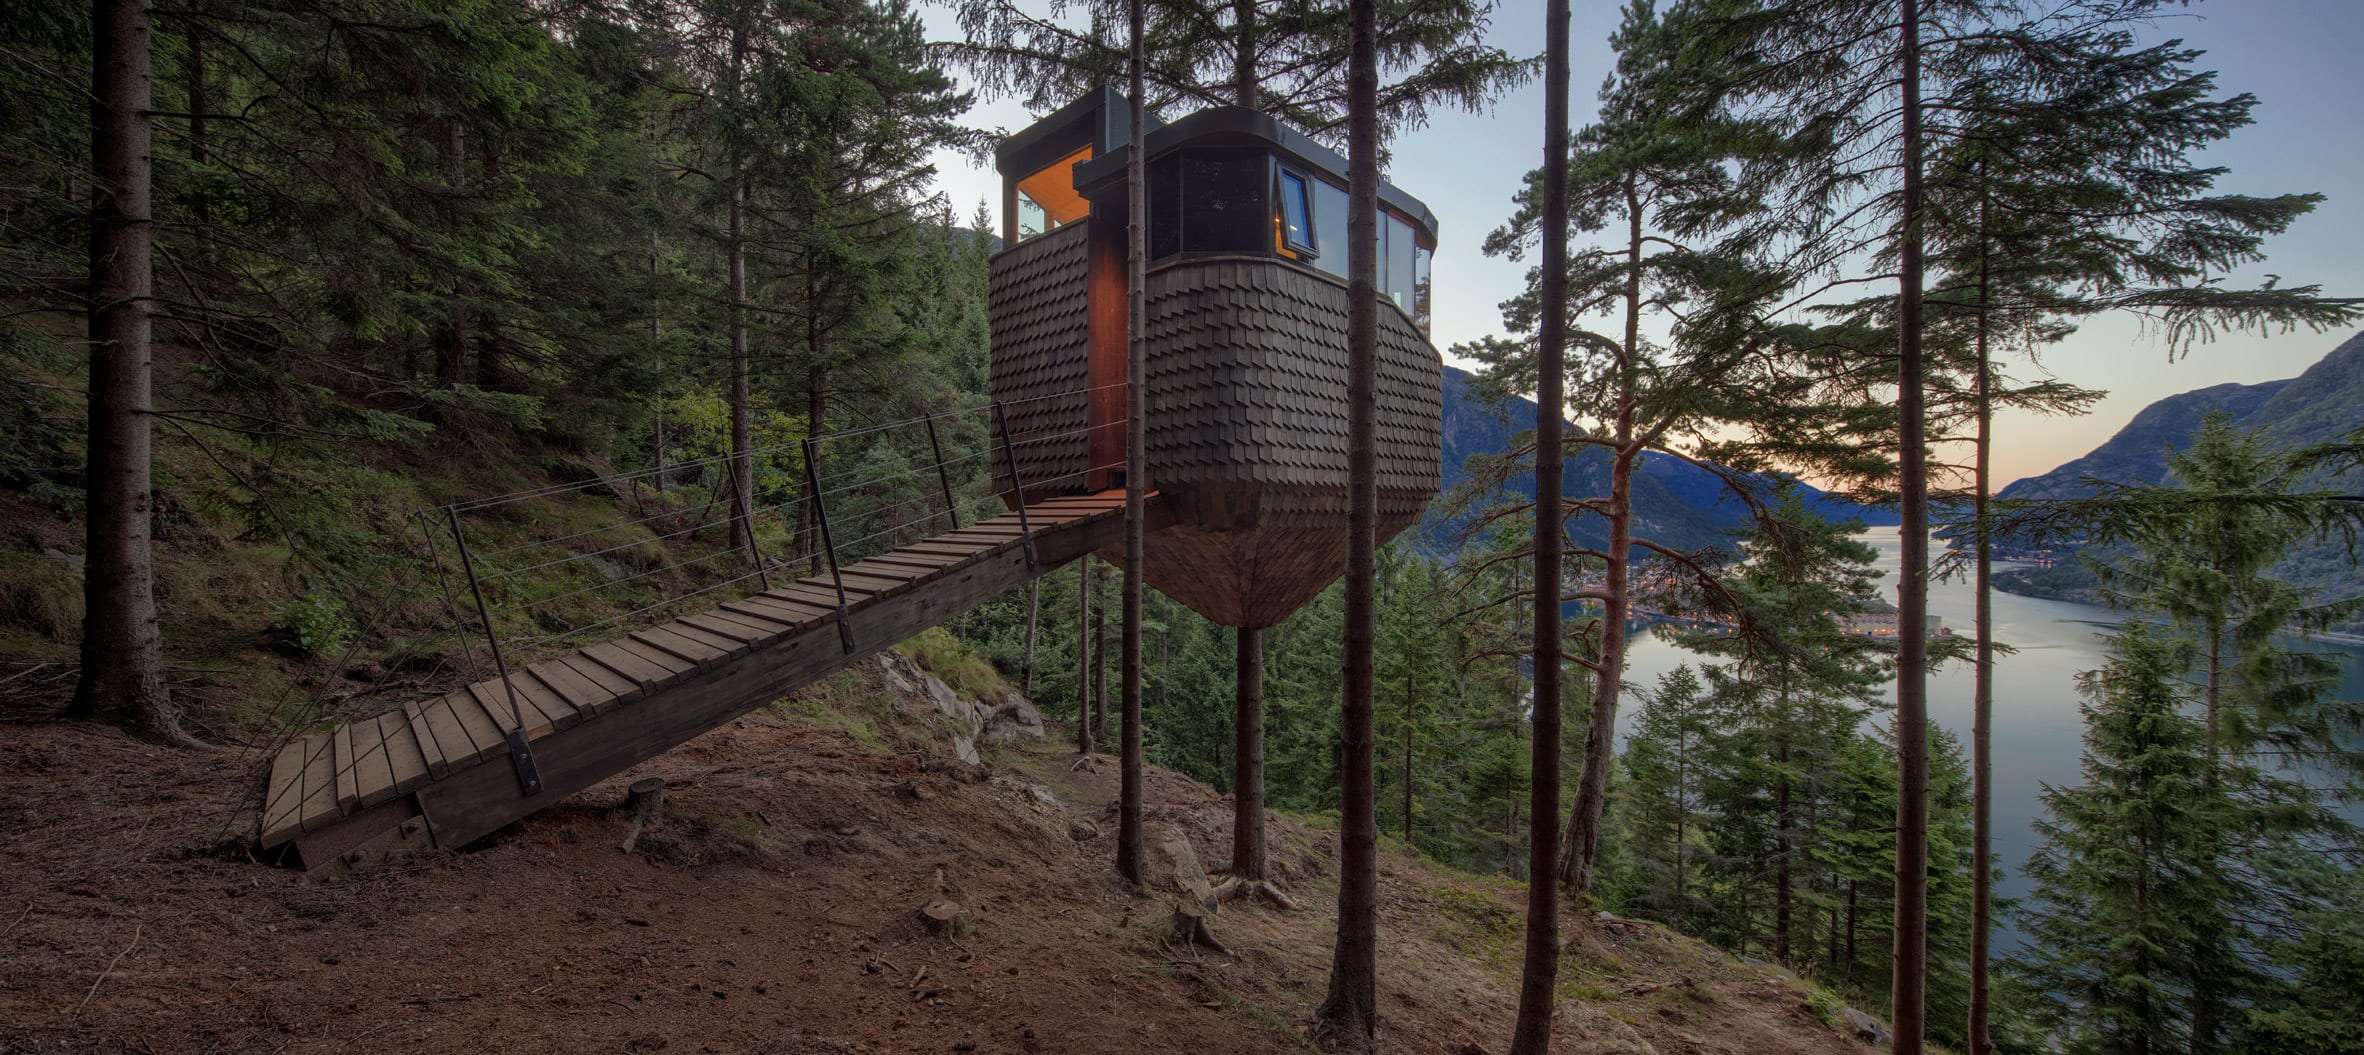  The woodnest treehouses envisioned illuminated at sunset